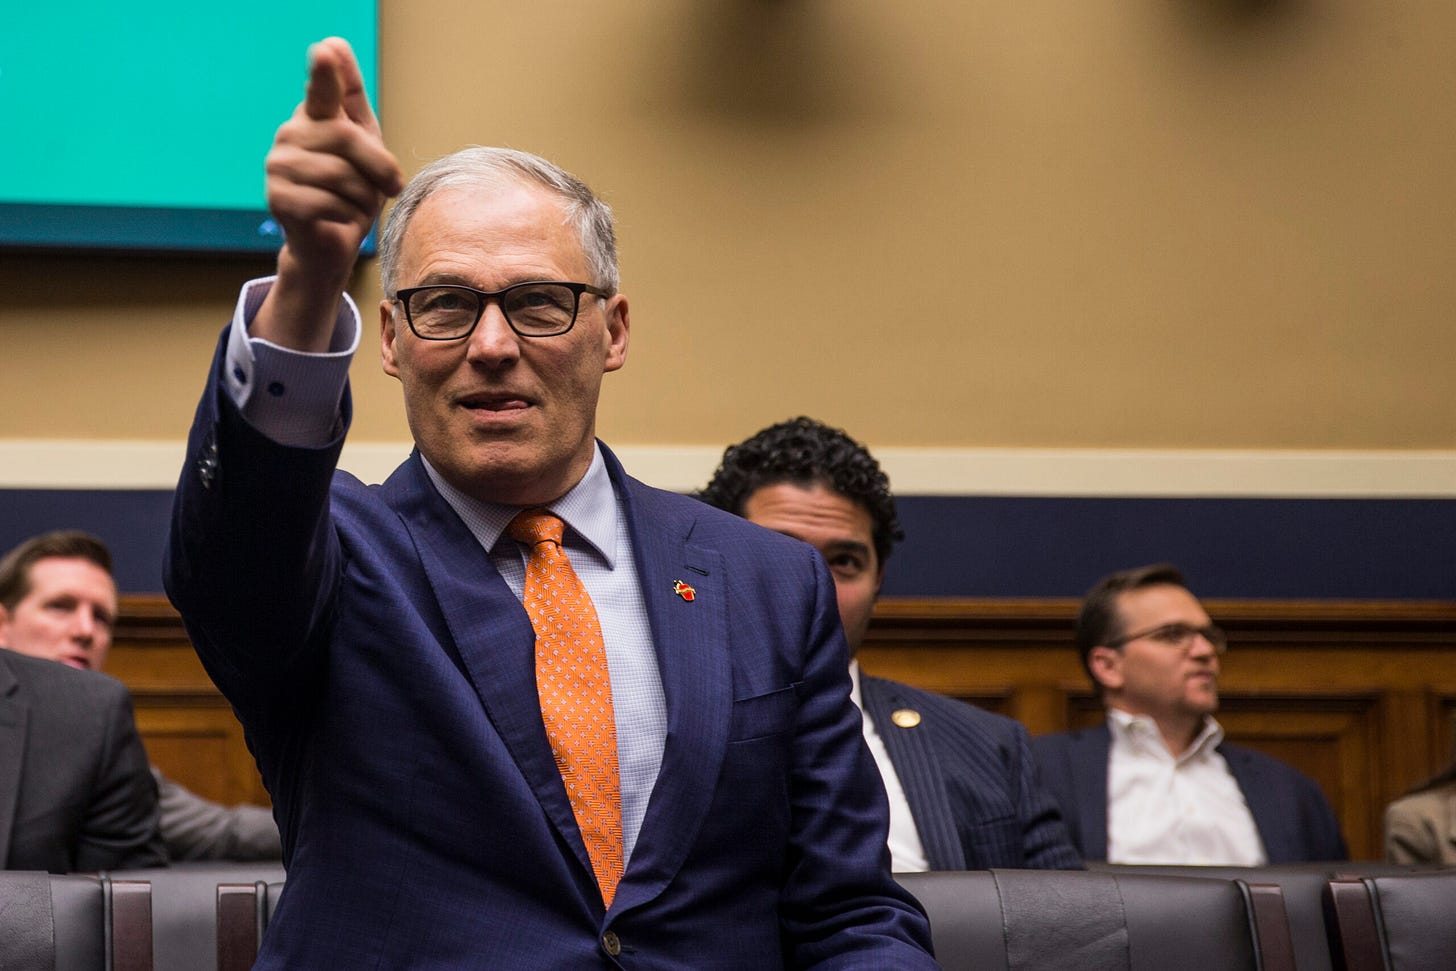 Washington Gov. Jay Inslee appears before the House Energy and Commerce Committee's Environment and Climate Change Subcommittee on Capitol Hill in April 2019. The following month he signed the Pollution Prevention for Our Future Act regulating toxic chemicals in Washington state. Credit: Zach Gibson/Getty Images